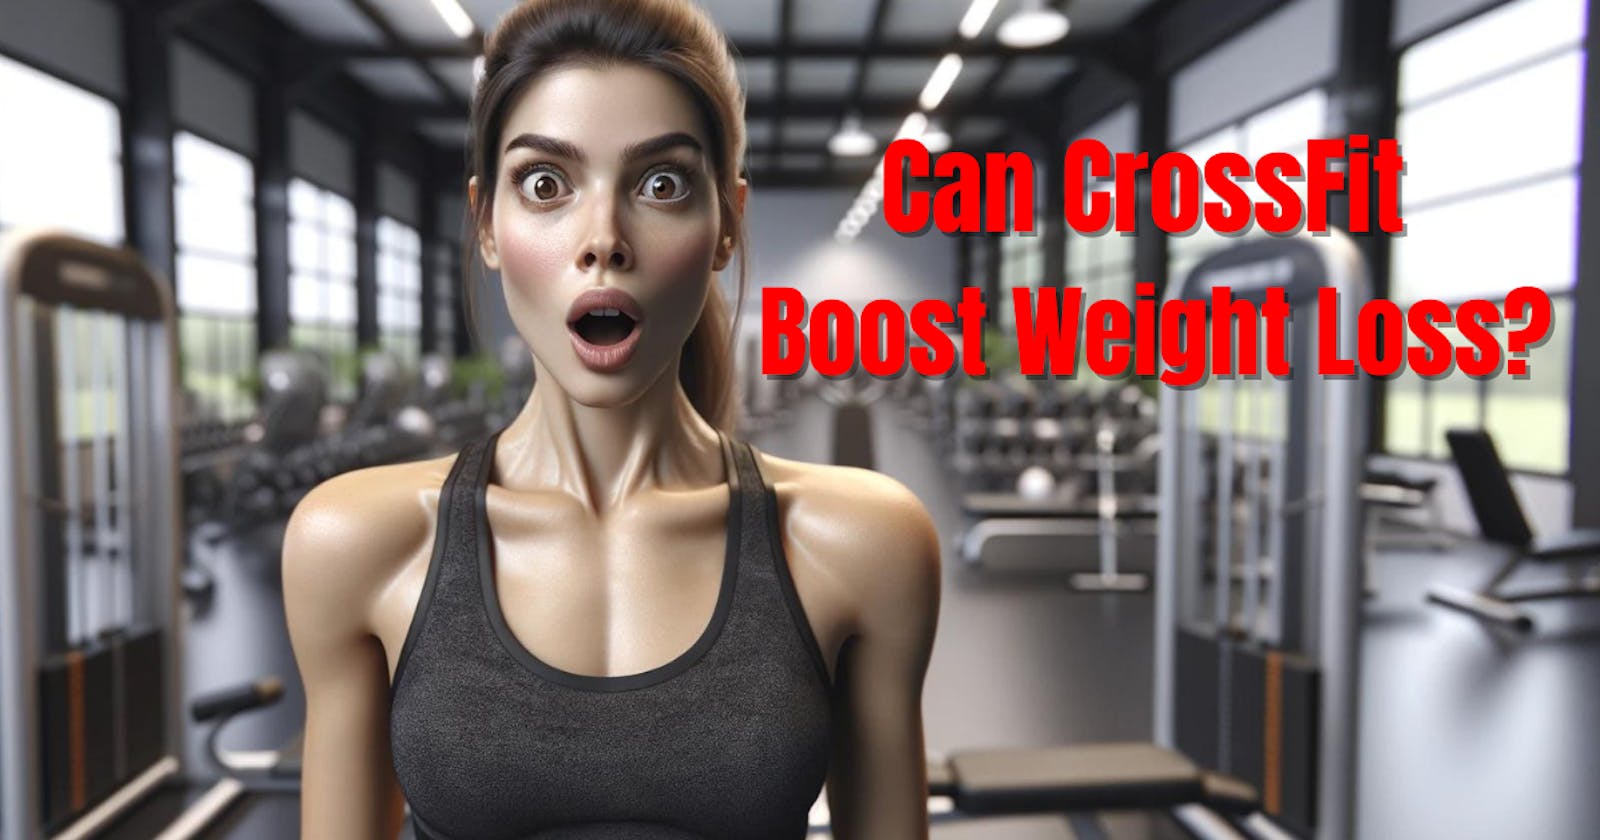 Can CrossFit Boost Weight Loss Effectively?